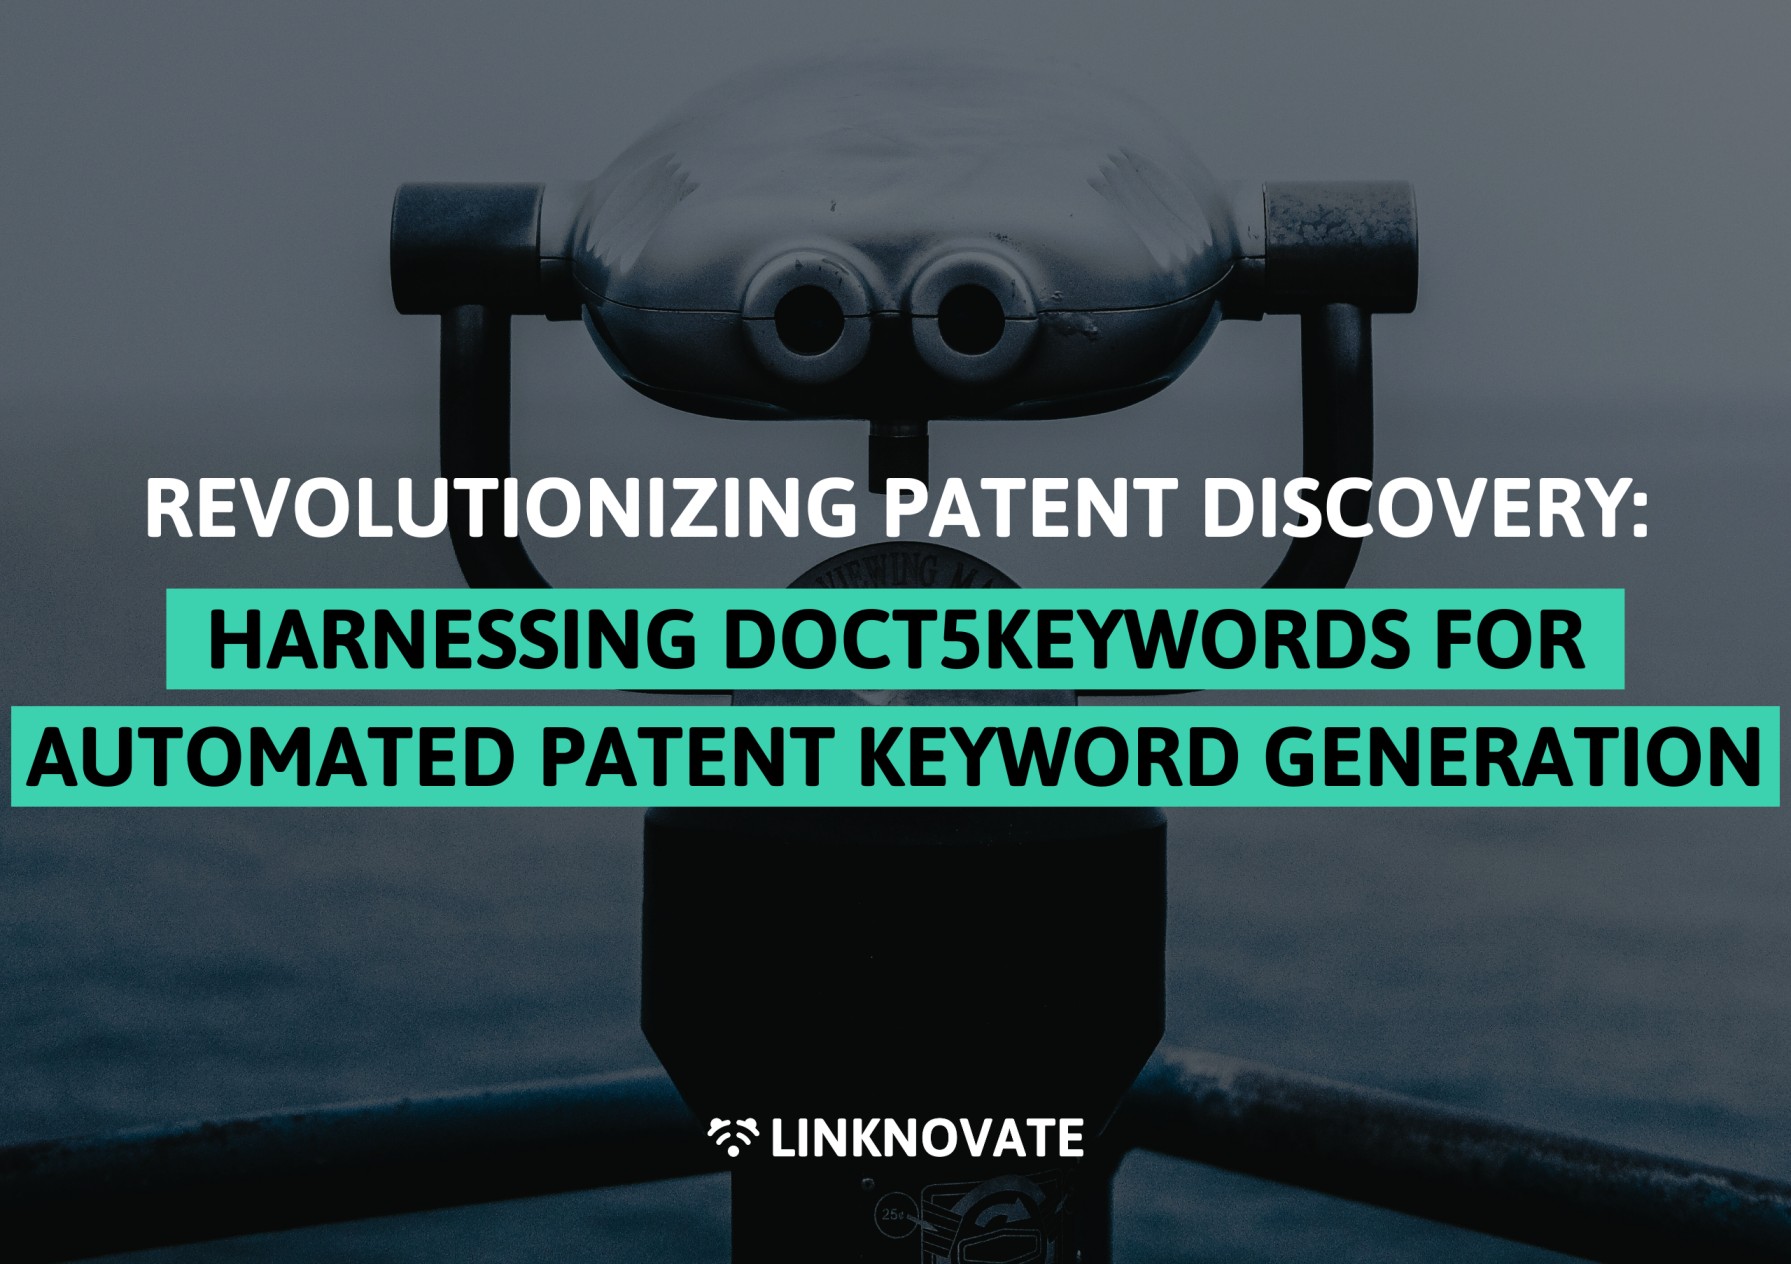 Revolutionizing Patent Discovery: Harnessing docT5keywords for Automated Patent Keyword Generation